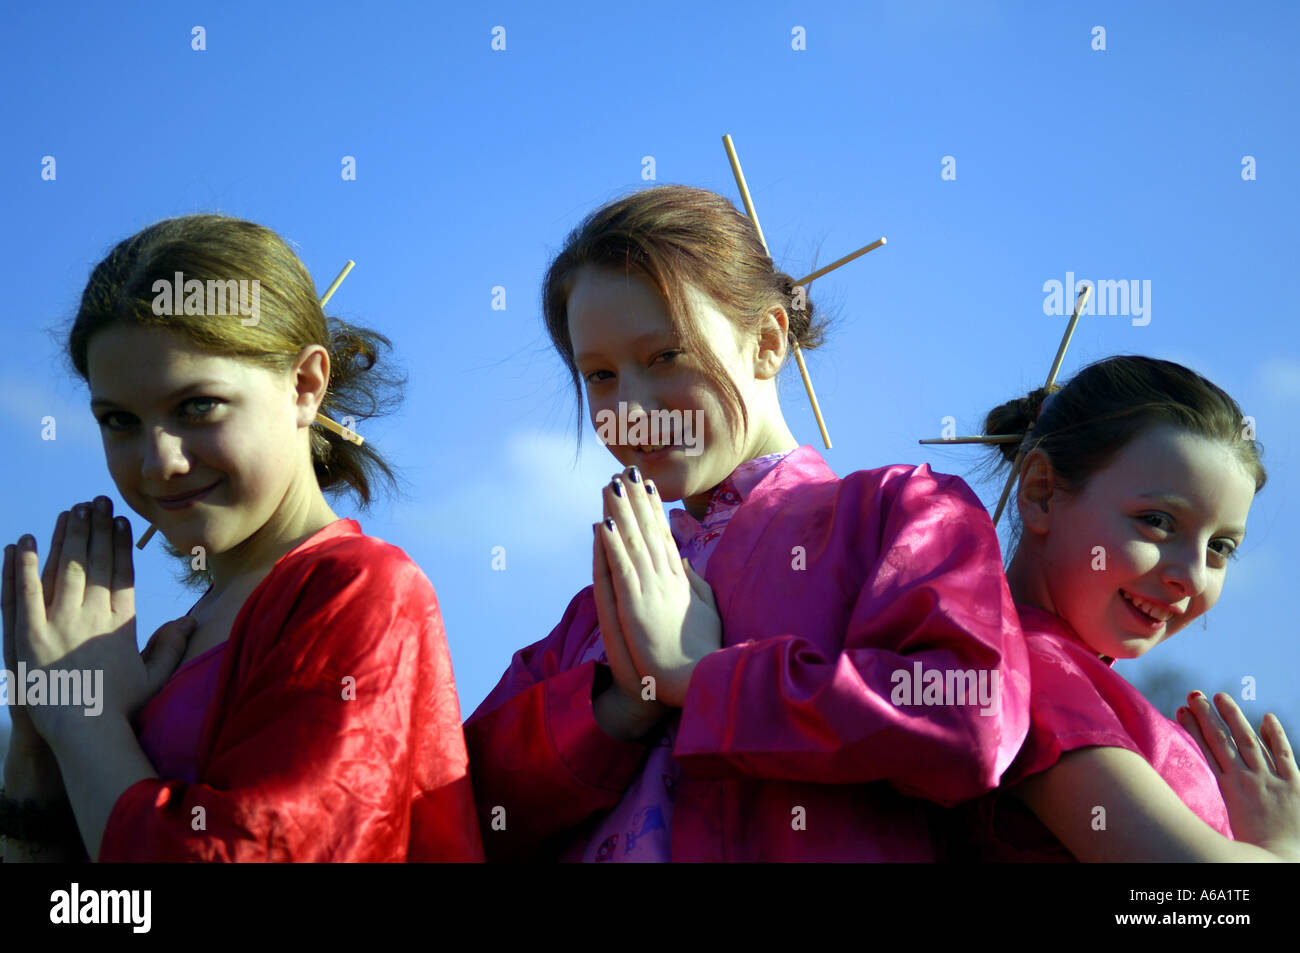 three girls dressed up as miss saigon chopsticks hair fashion eleven years old caucasian white girls female young youth horizont Stock Photo